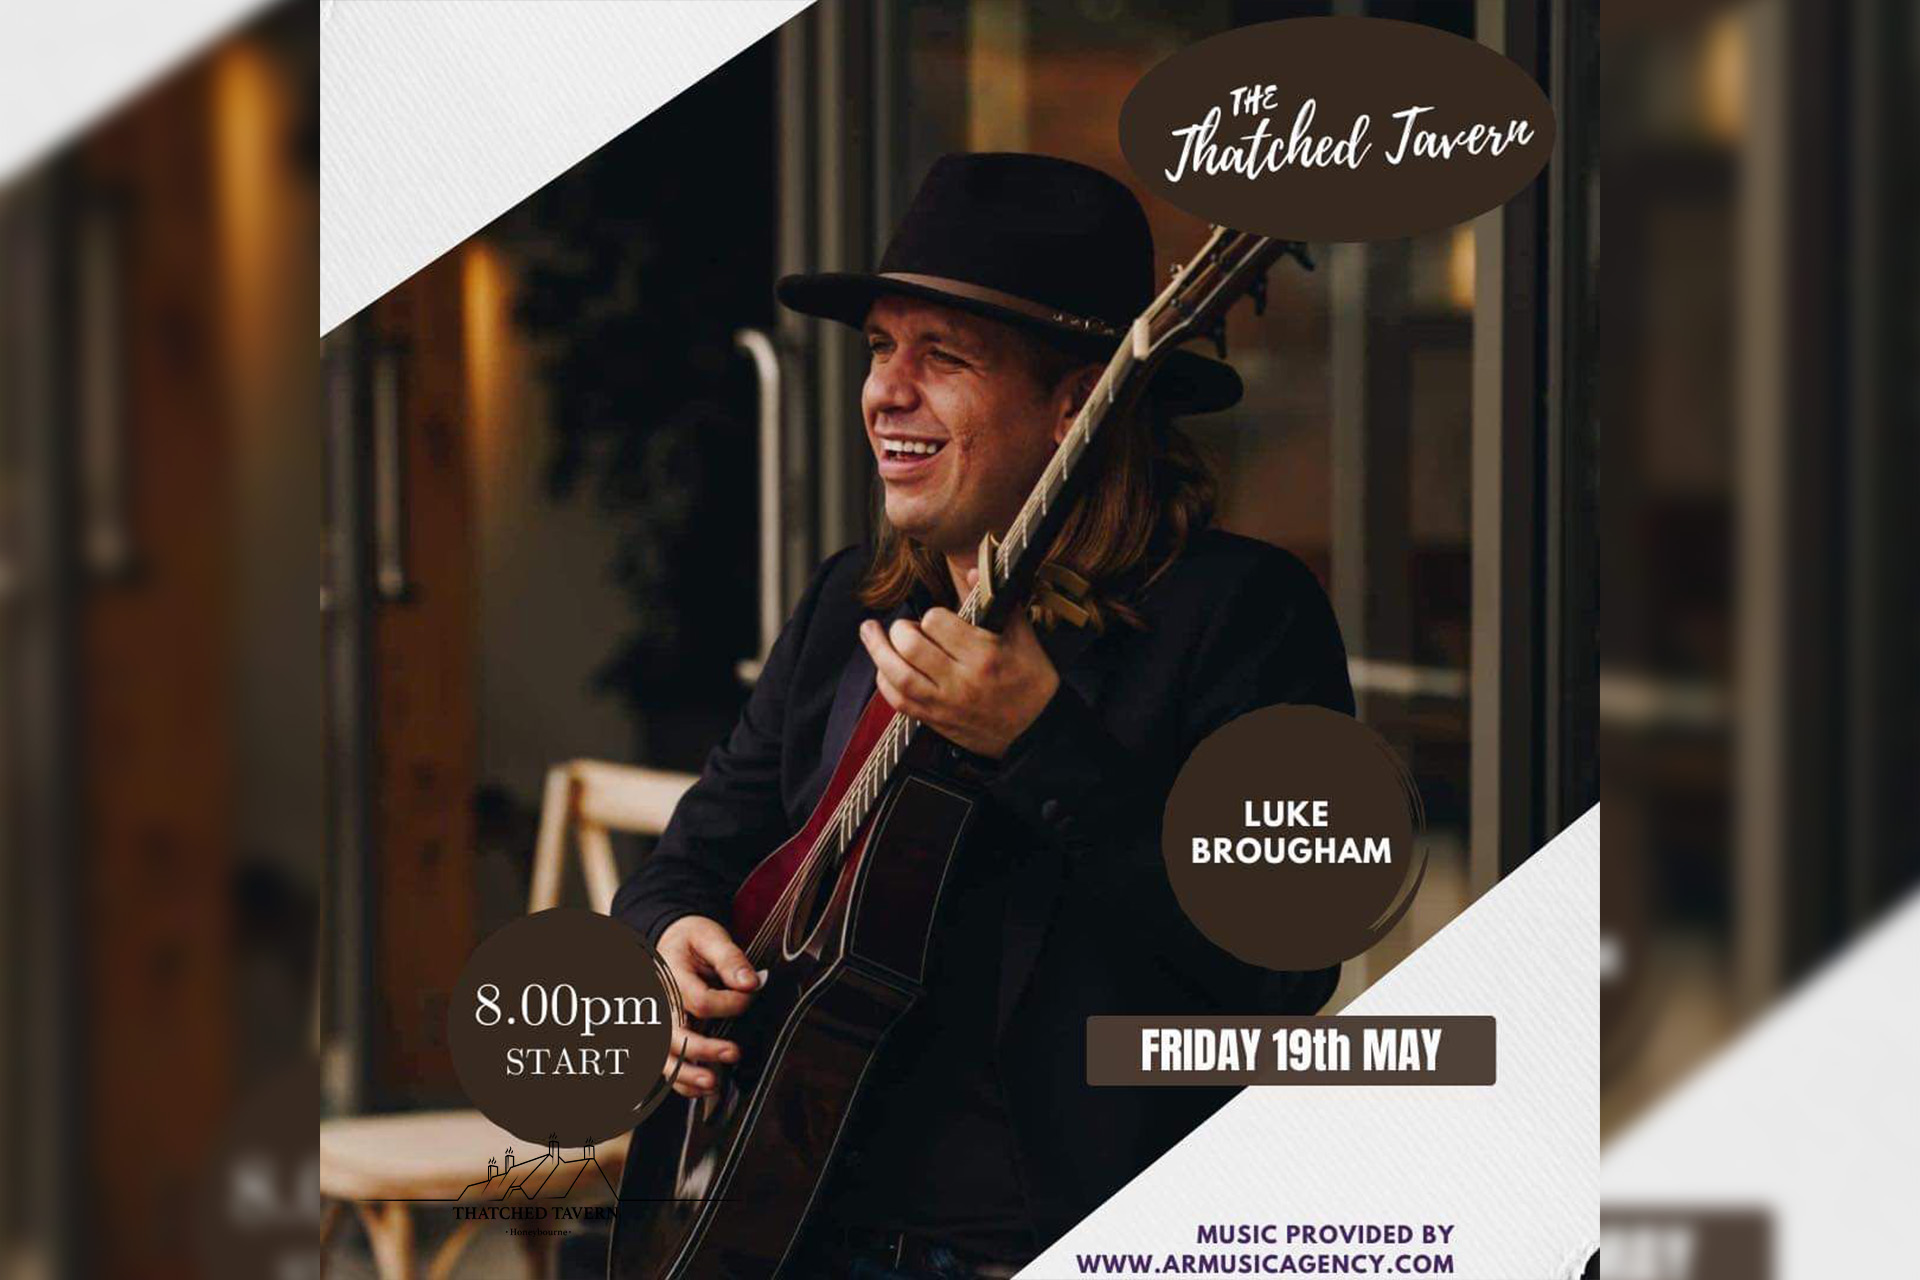 Live music performed by the amazing Luke Brougham at The Thatched Tavern Pub in Honeybourne - Friday 19th May from 8.00pm. Come and joins us for an amazing night of entertainment and warm vibes.